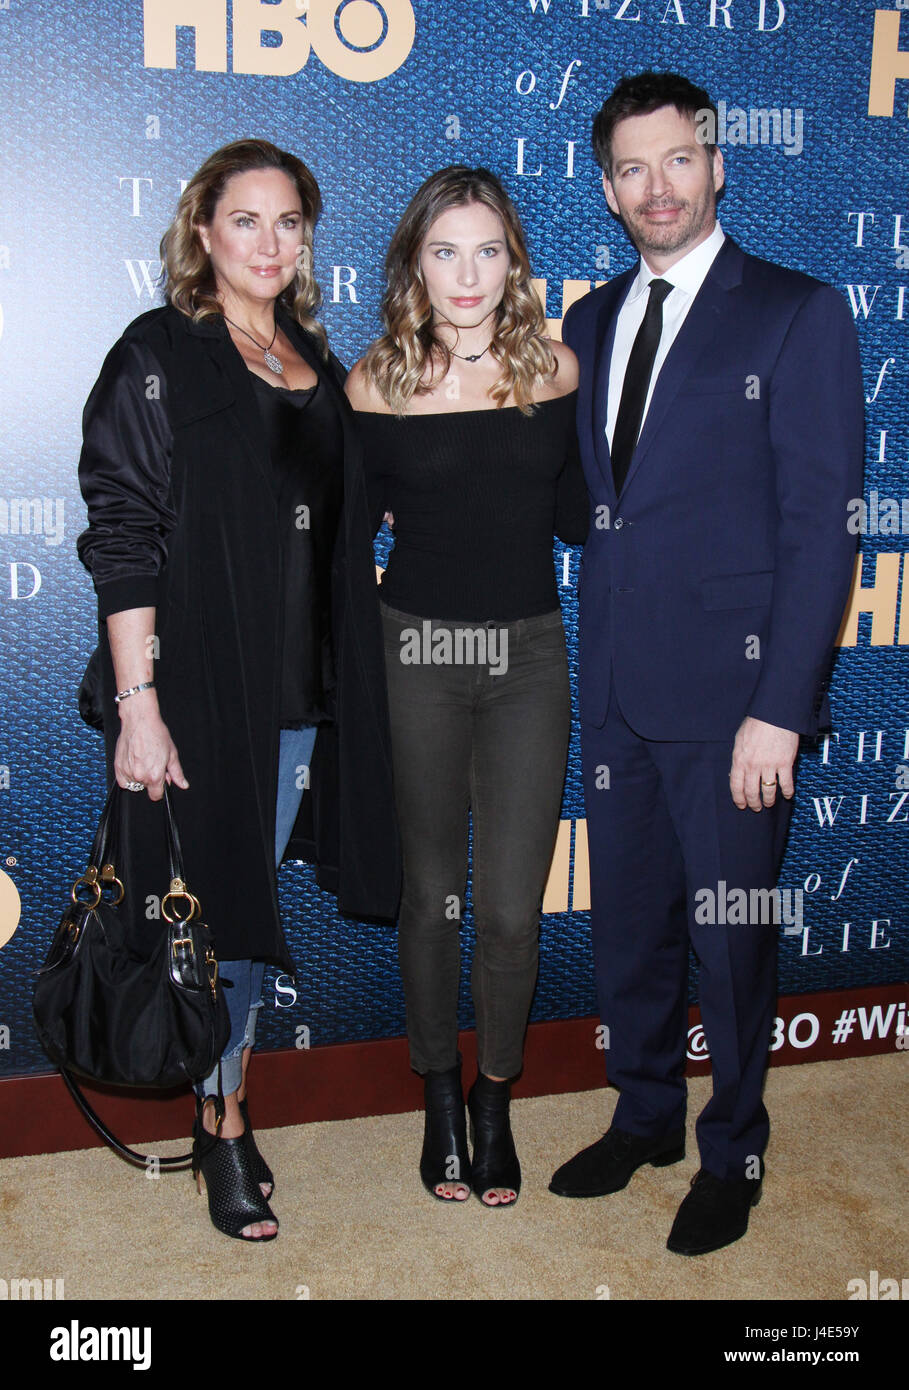 York, USA. 12th May, Jill Goodacre, Sarah Kate Connick, Harry Jr. attend HBO Films presents The Wizard of Premiere at the Museum of Modern Art in New York